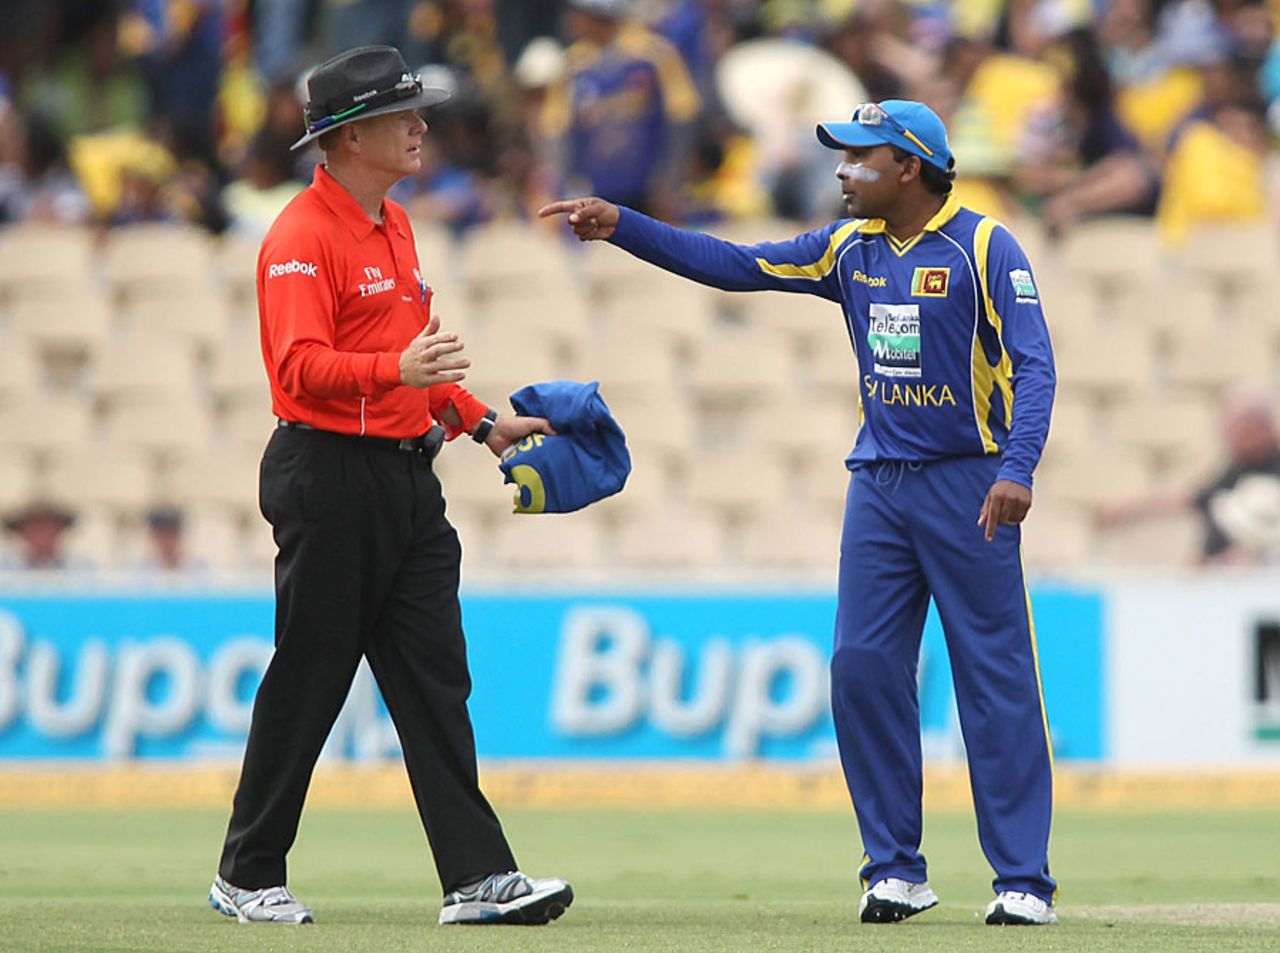 Mahela Jayawardene has a heated exchange with umpire Bruce Oxenford, Australia v Sri Lanka, Commonwealth Bank Series, 2nd final, Adelaide, March 6, 2012 